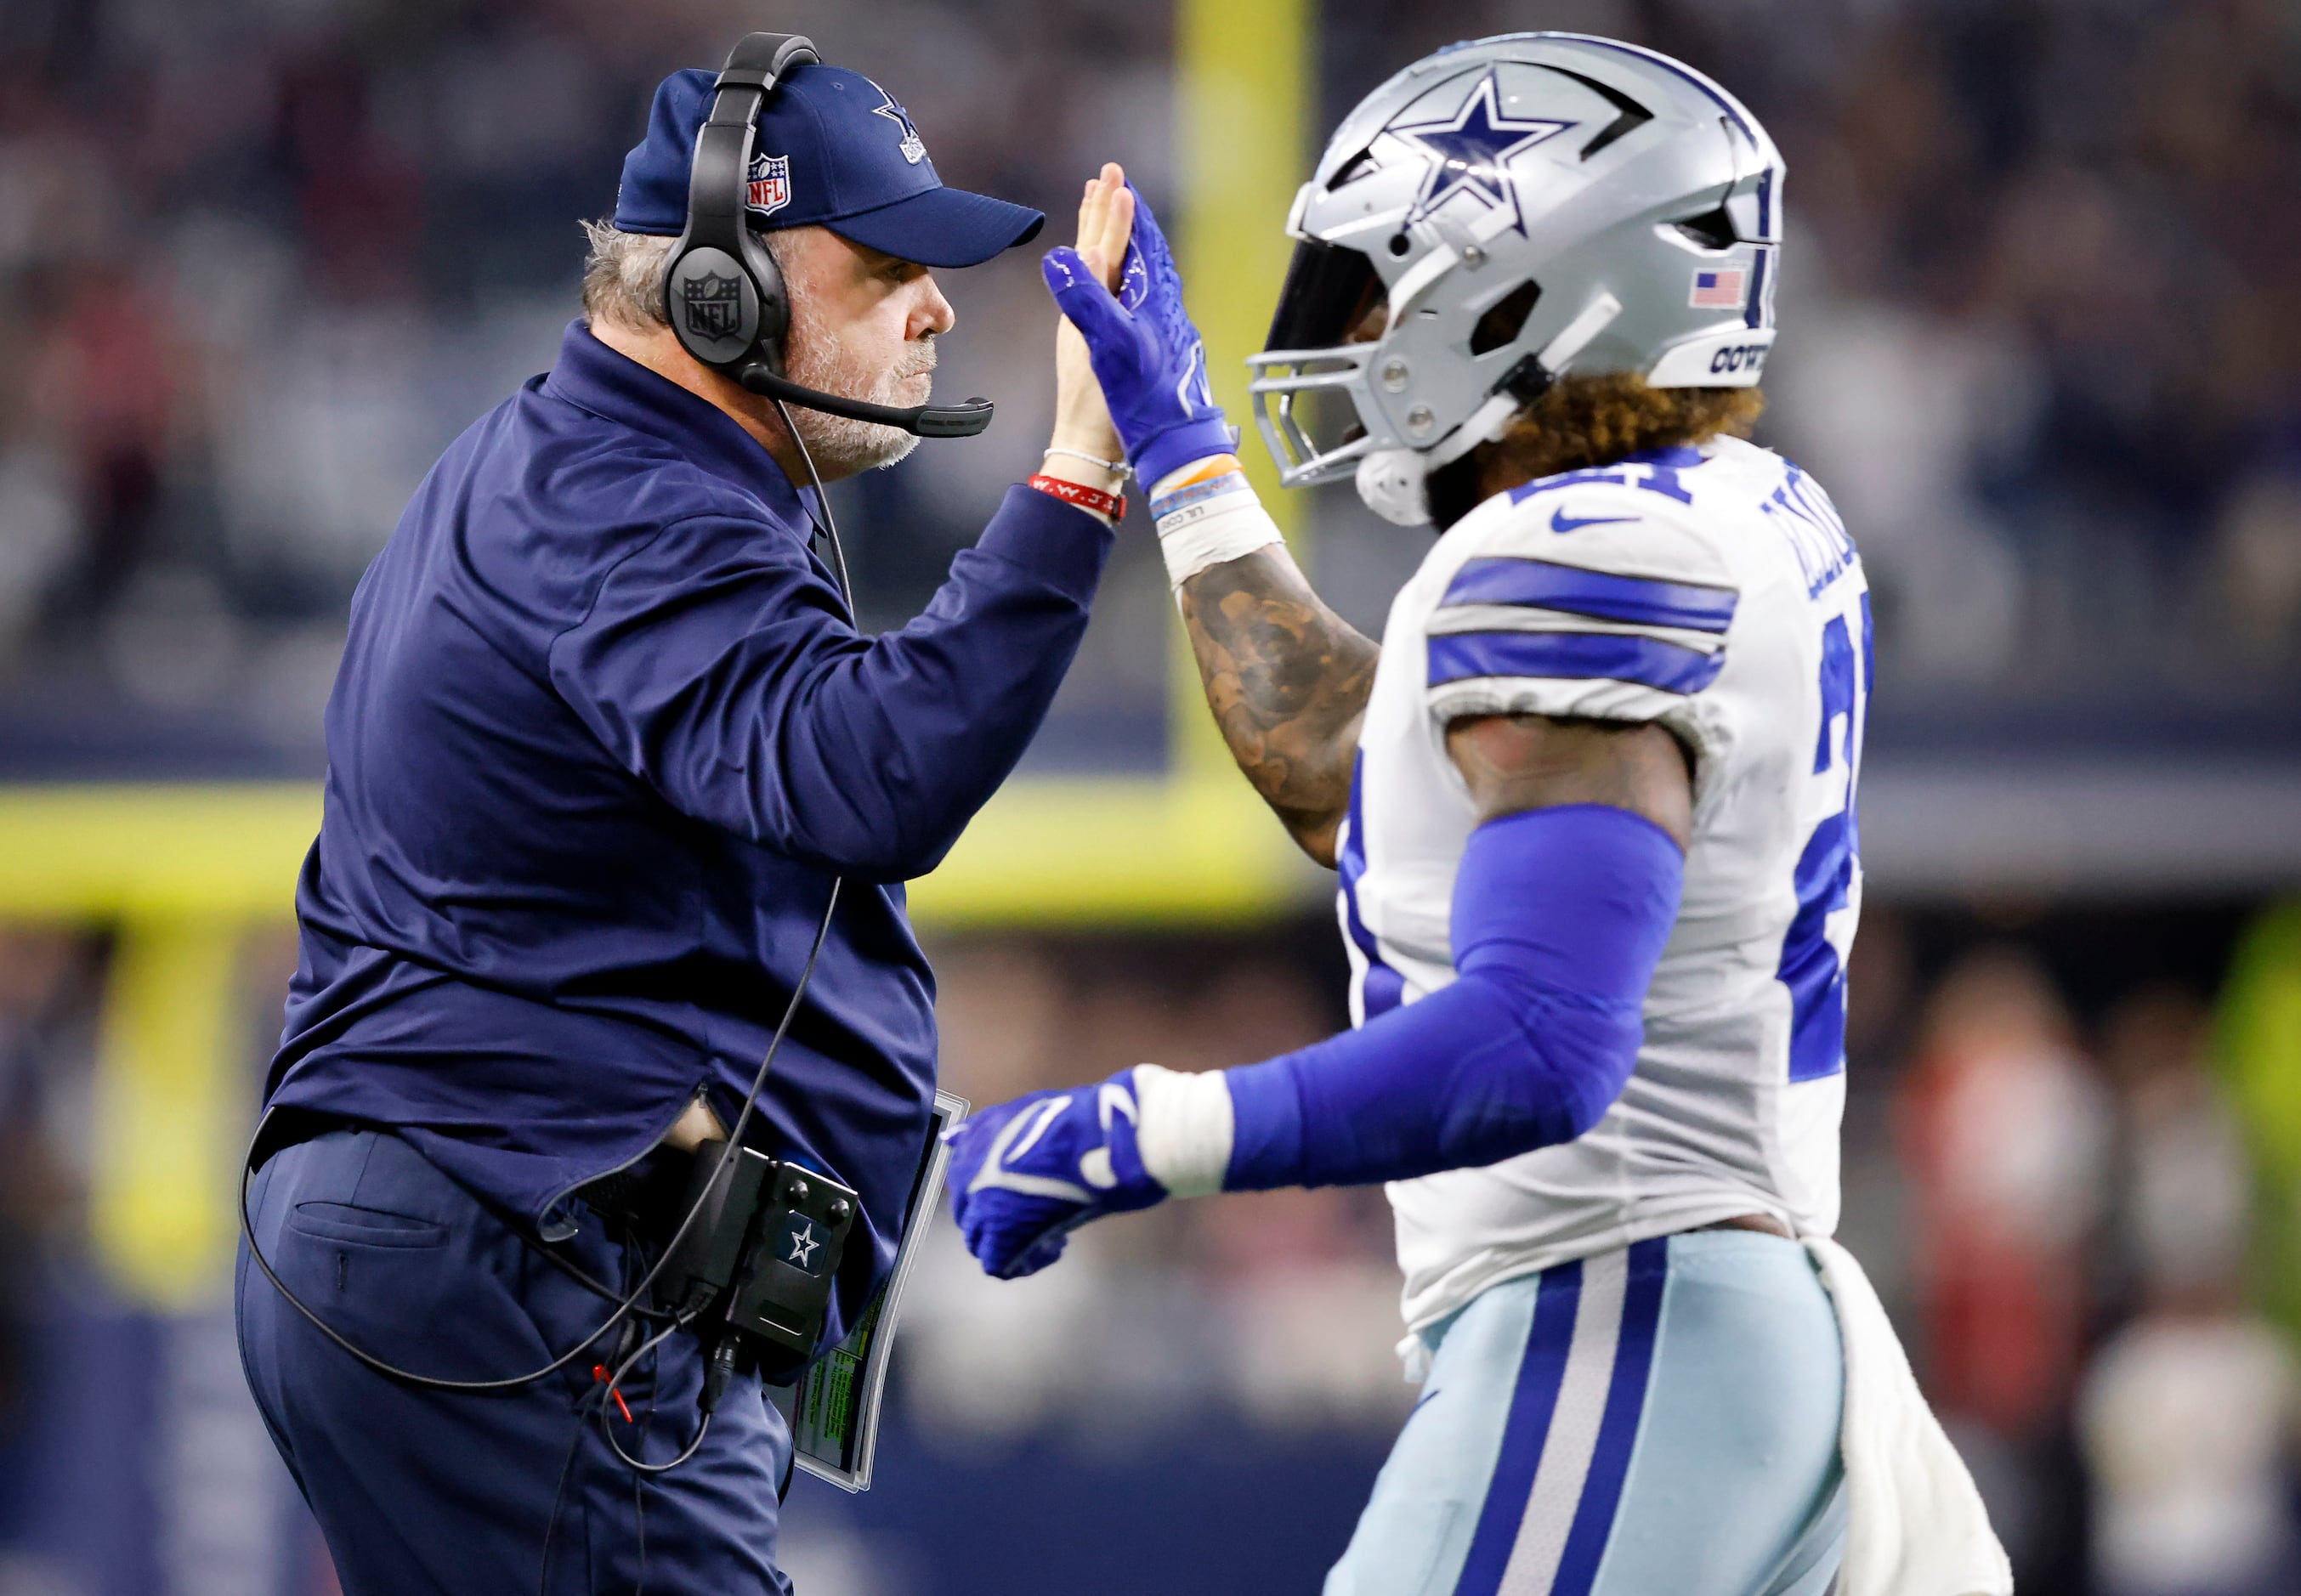 Photos: Cowboys avoid being upset at home, come back to win over Texans